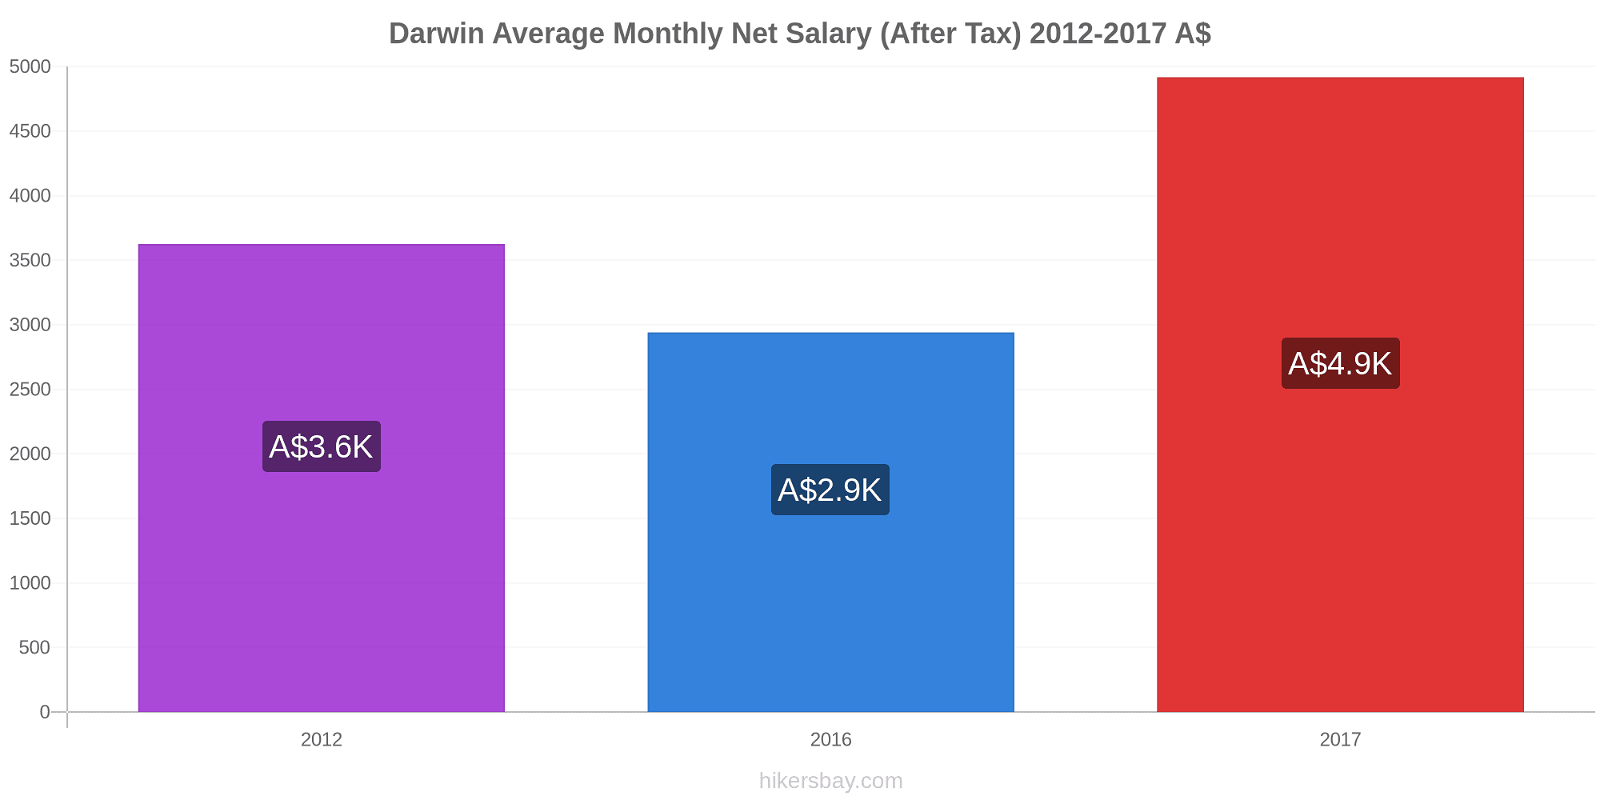 Darwin price changes Average Monthly Net Salary (After Tax) hikersbay.com